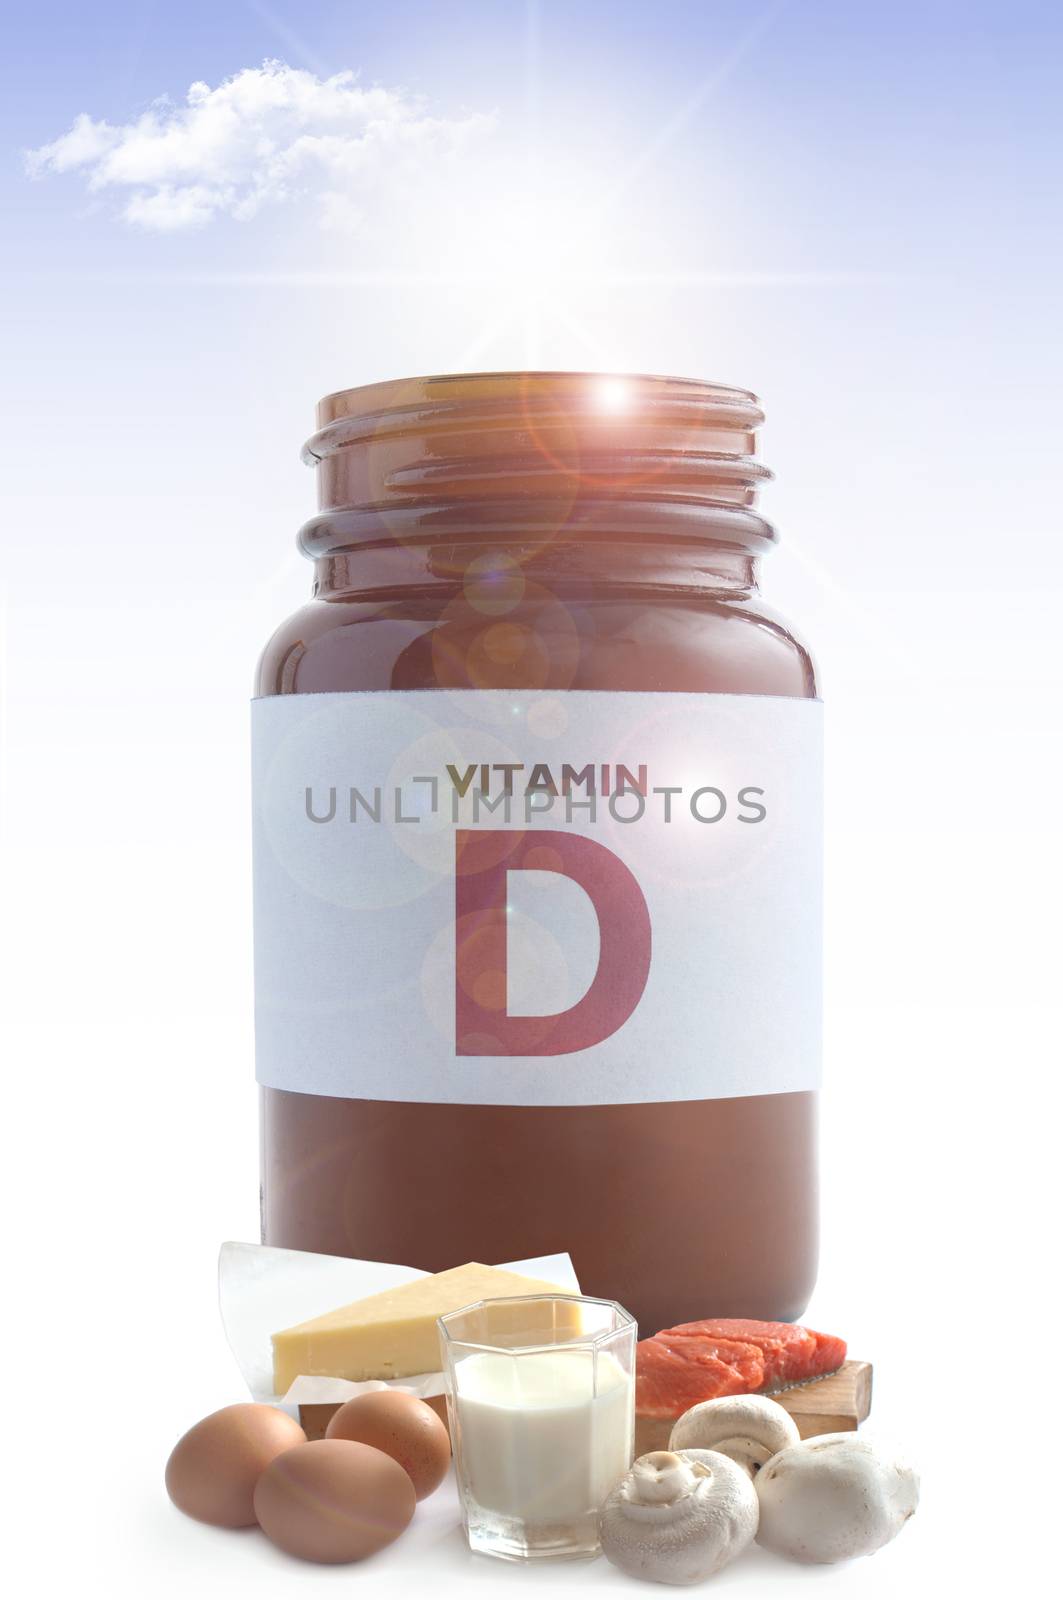 Sunshine pouring out of vitamin d jar over a white background